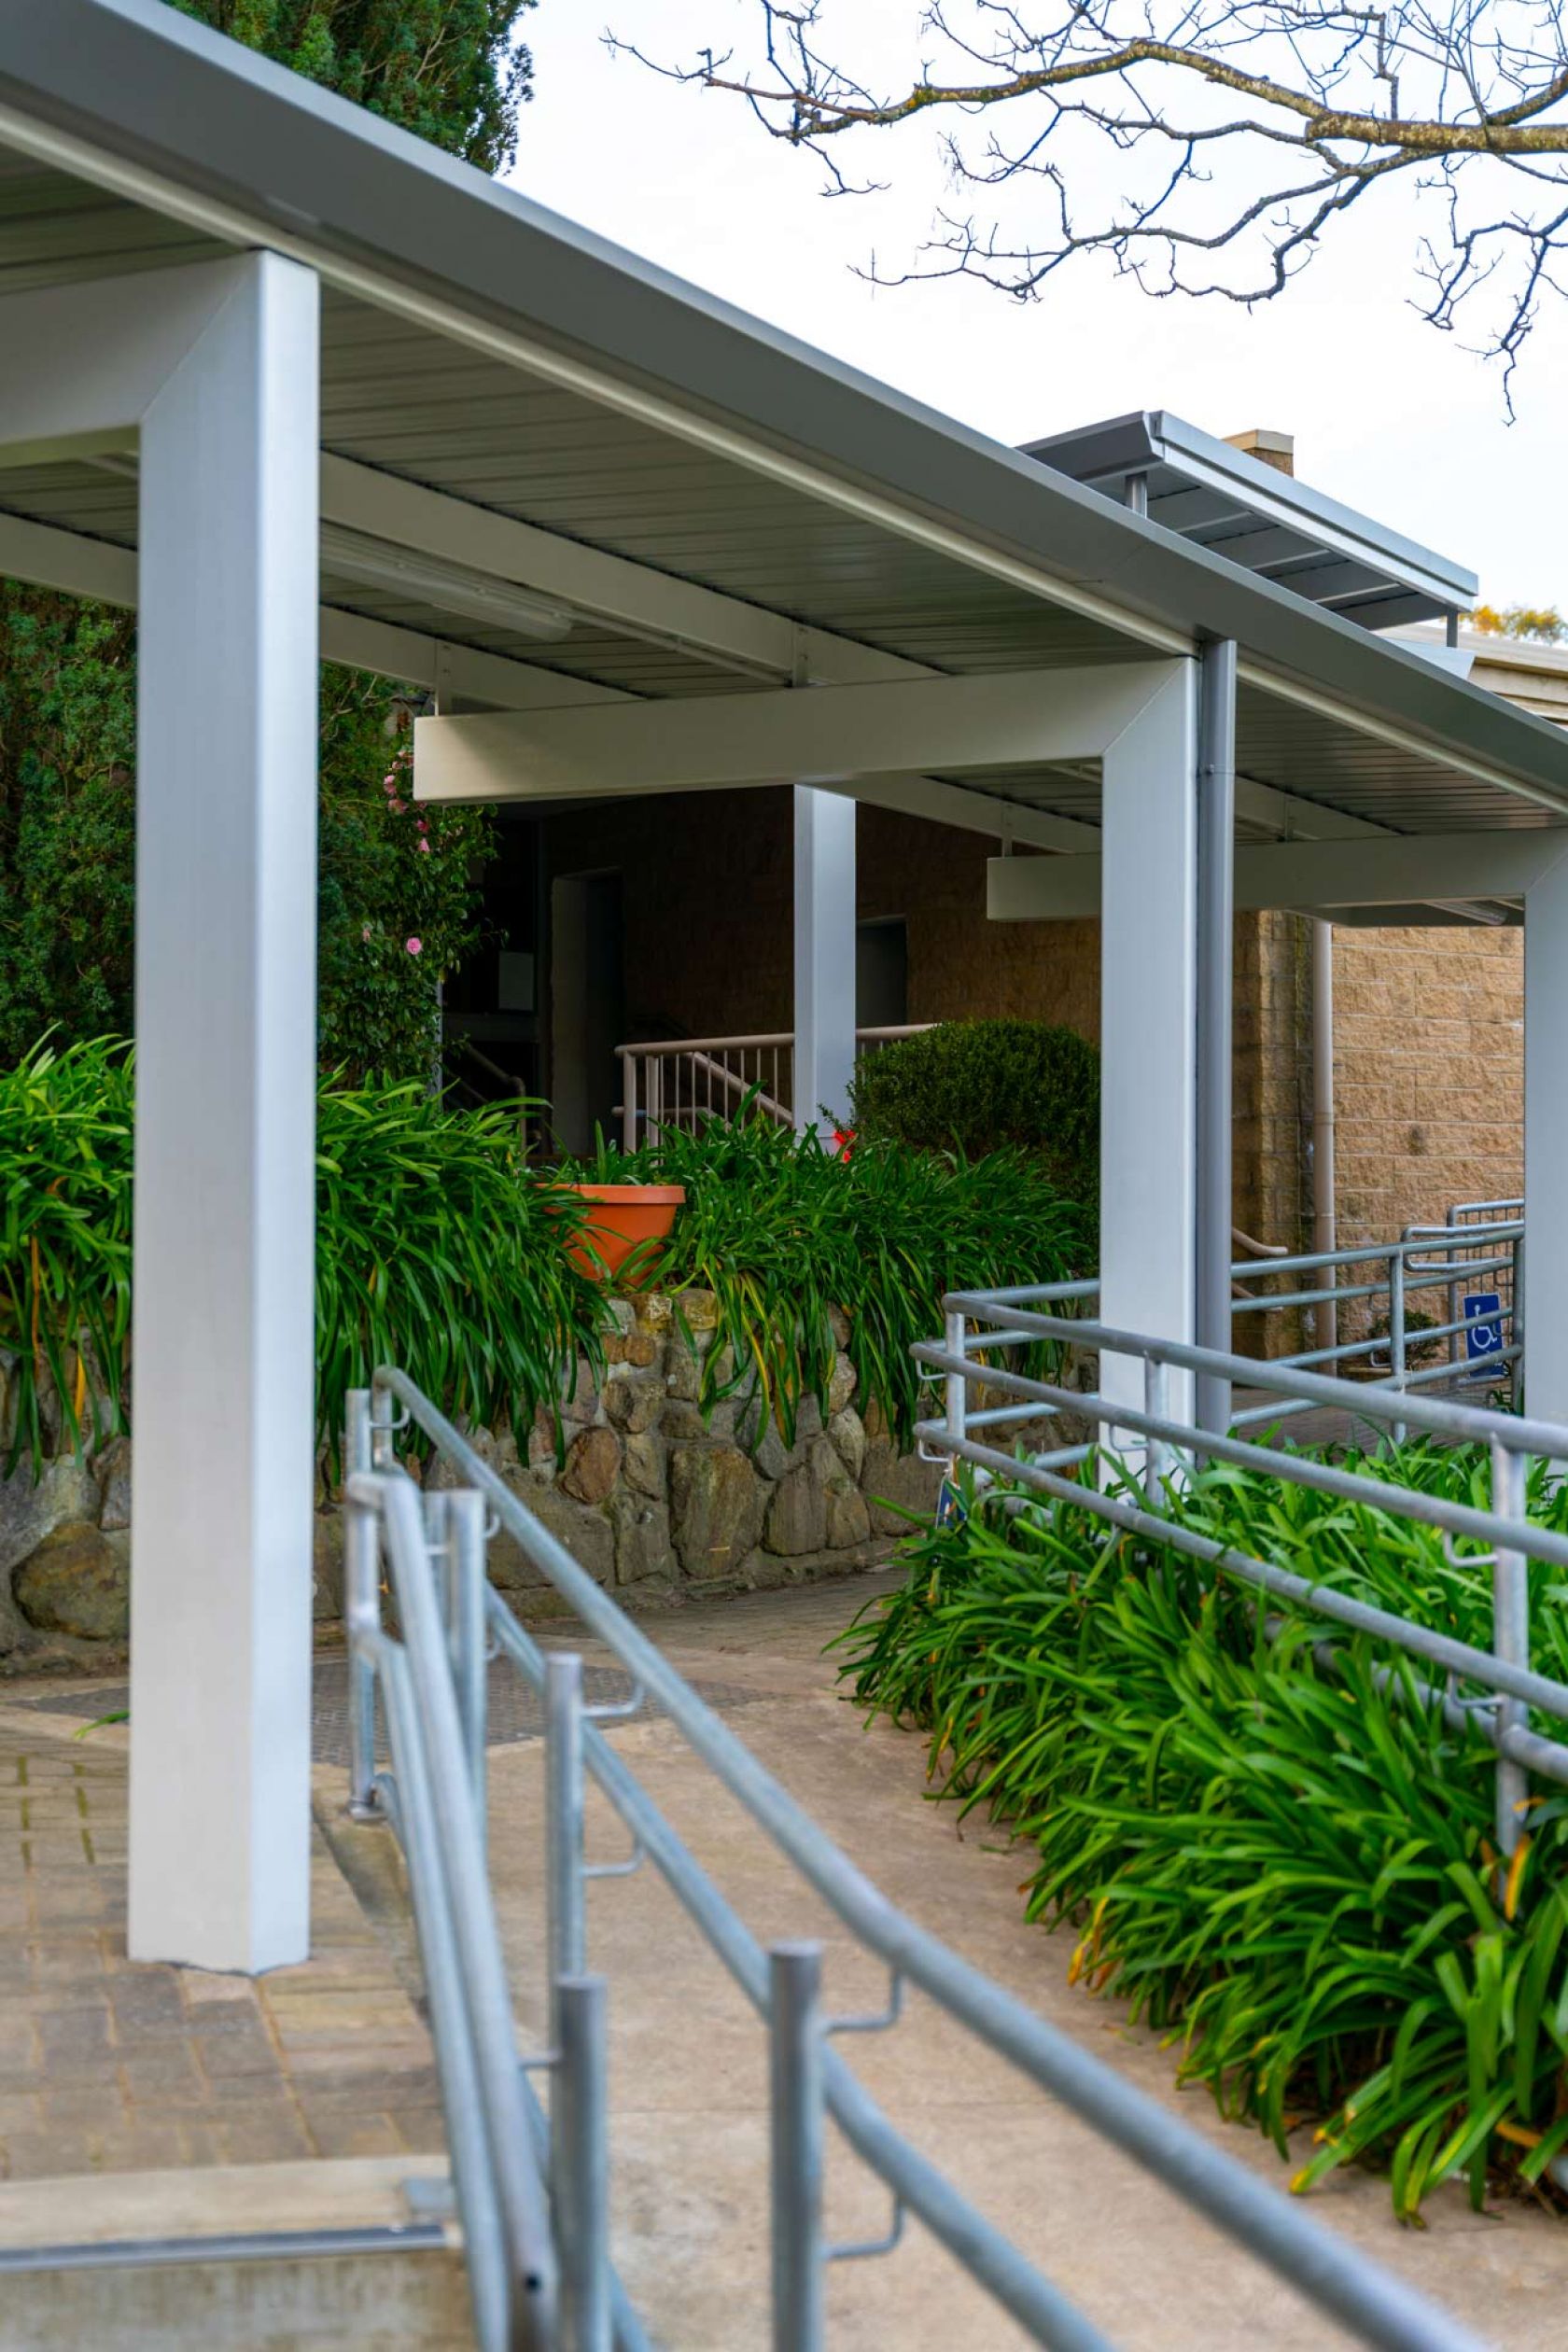 st catherines primary school adelaide construction fitout education exterior covered walkway